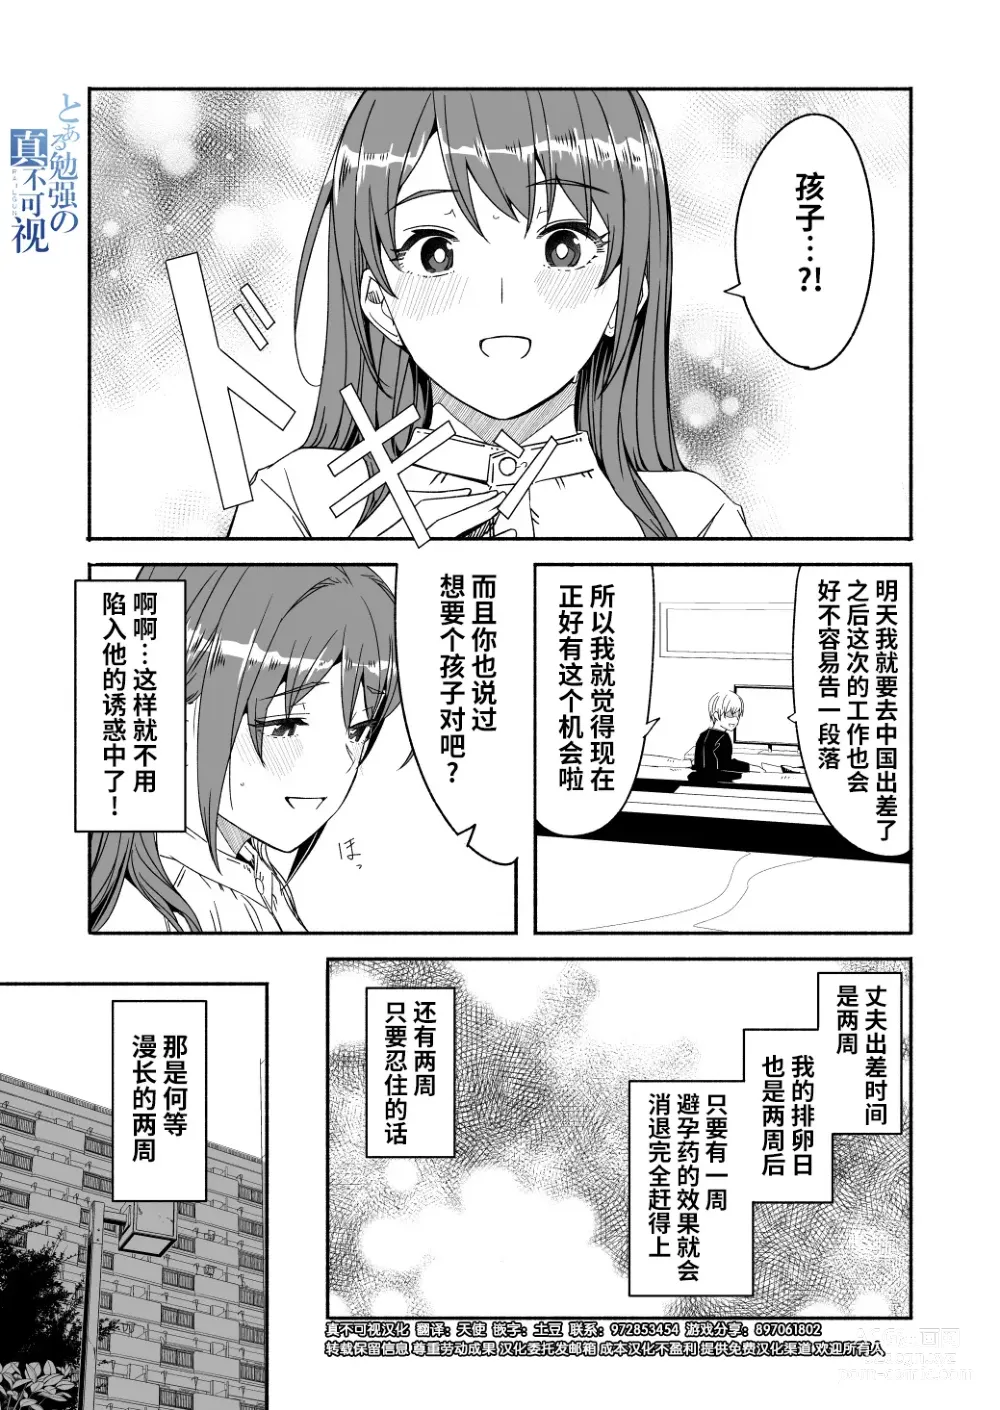 Page 23 of doujinshi Until Married Woman Conceives Seed 4-02&03&04,5-01